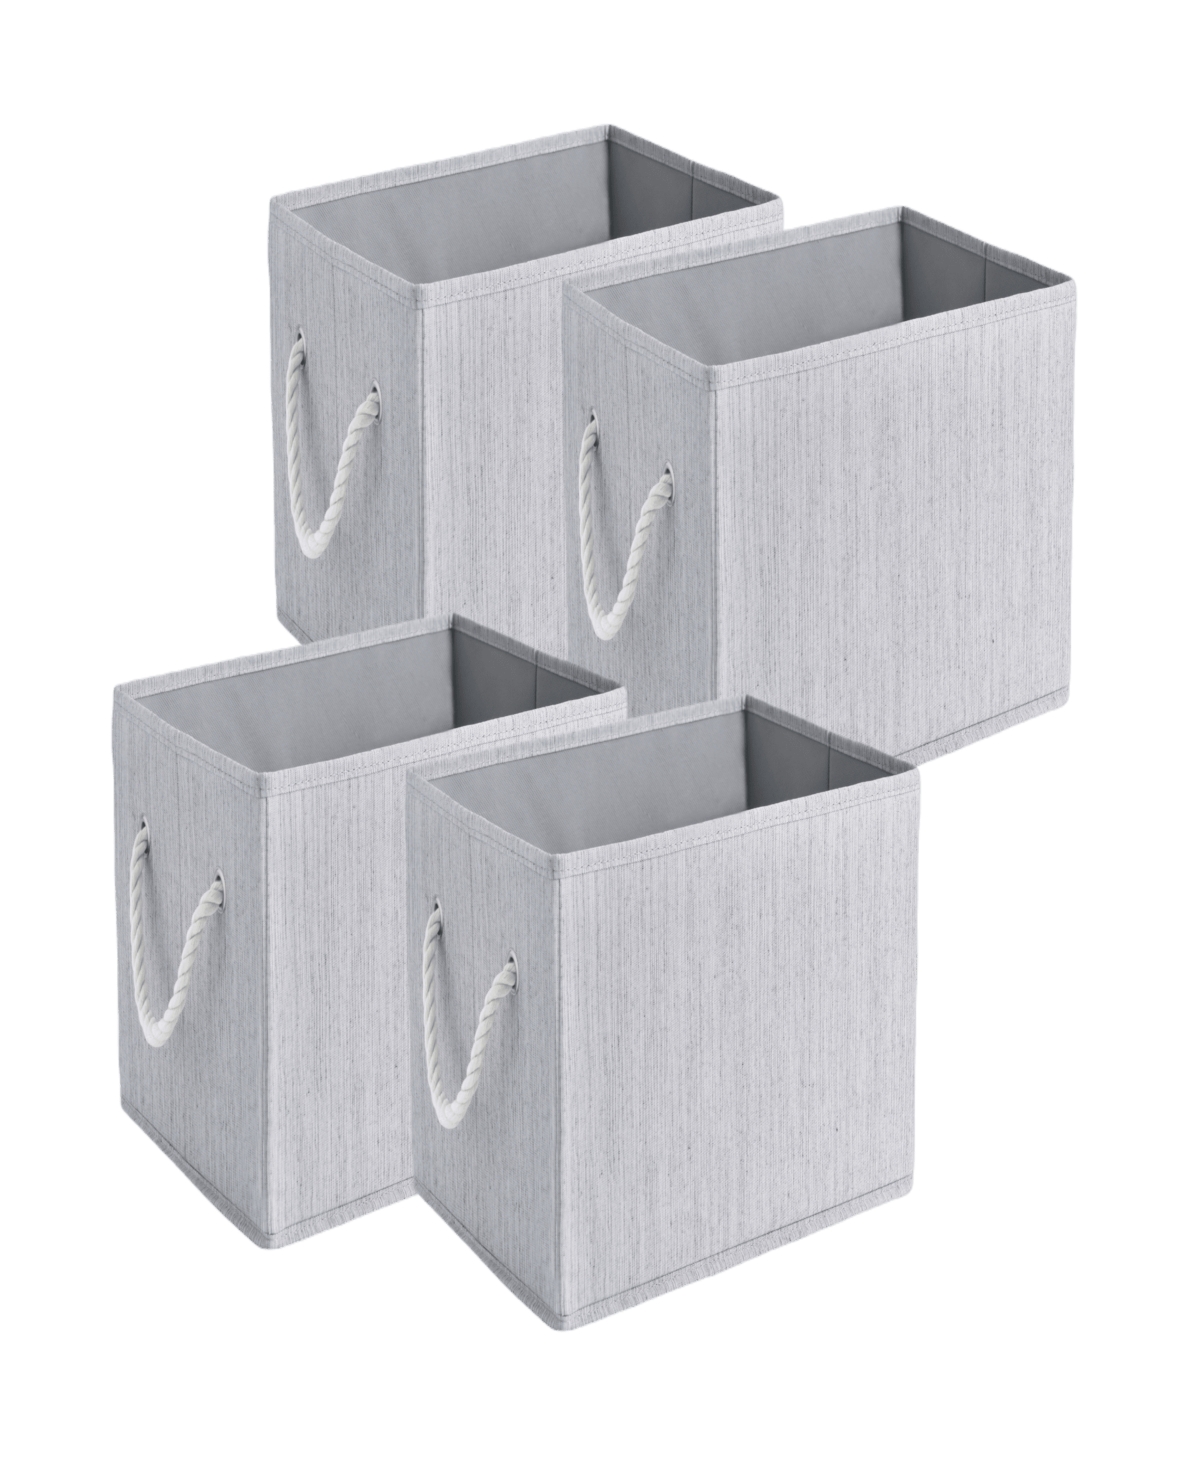 Wethinkstorage 20 Litre Collapsible Fabric Storage Bins With Cotton Rope Handles, Set Of 4 In Gray